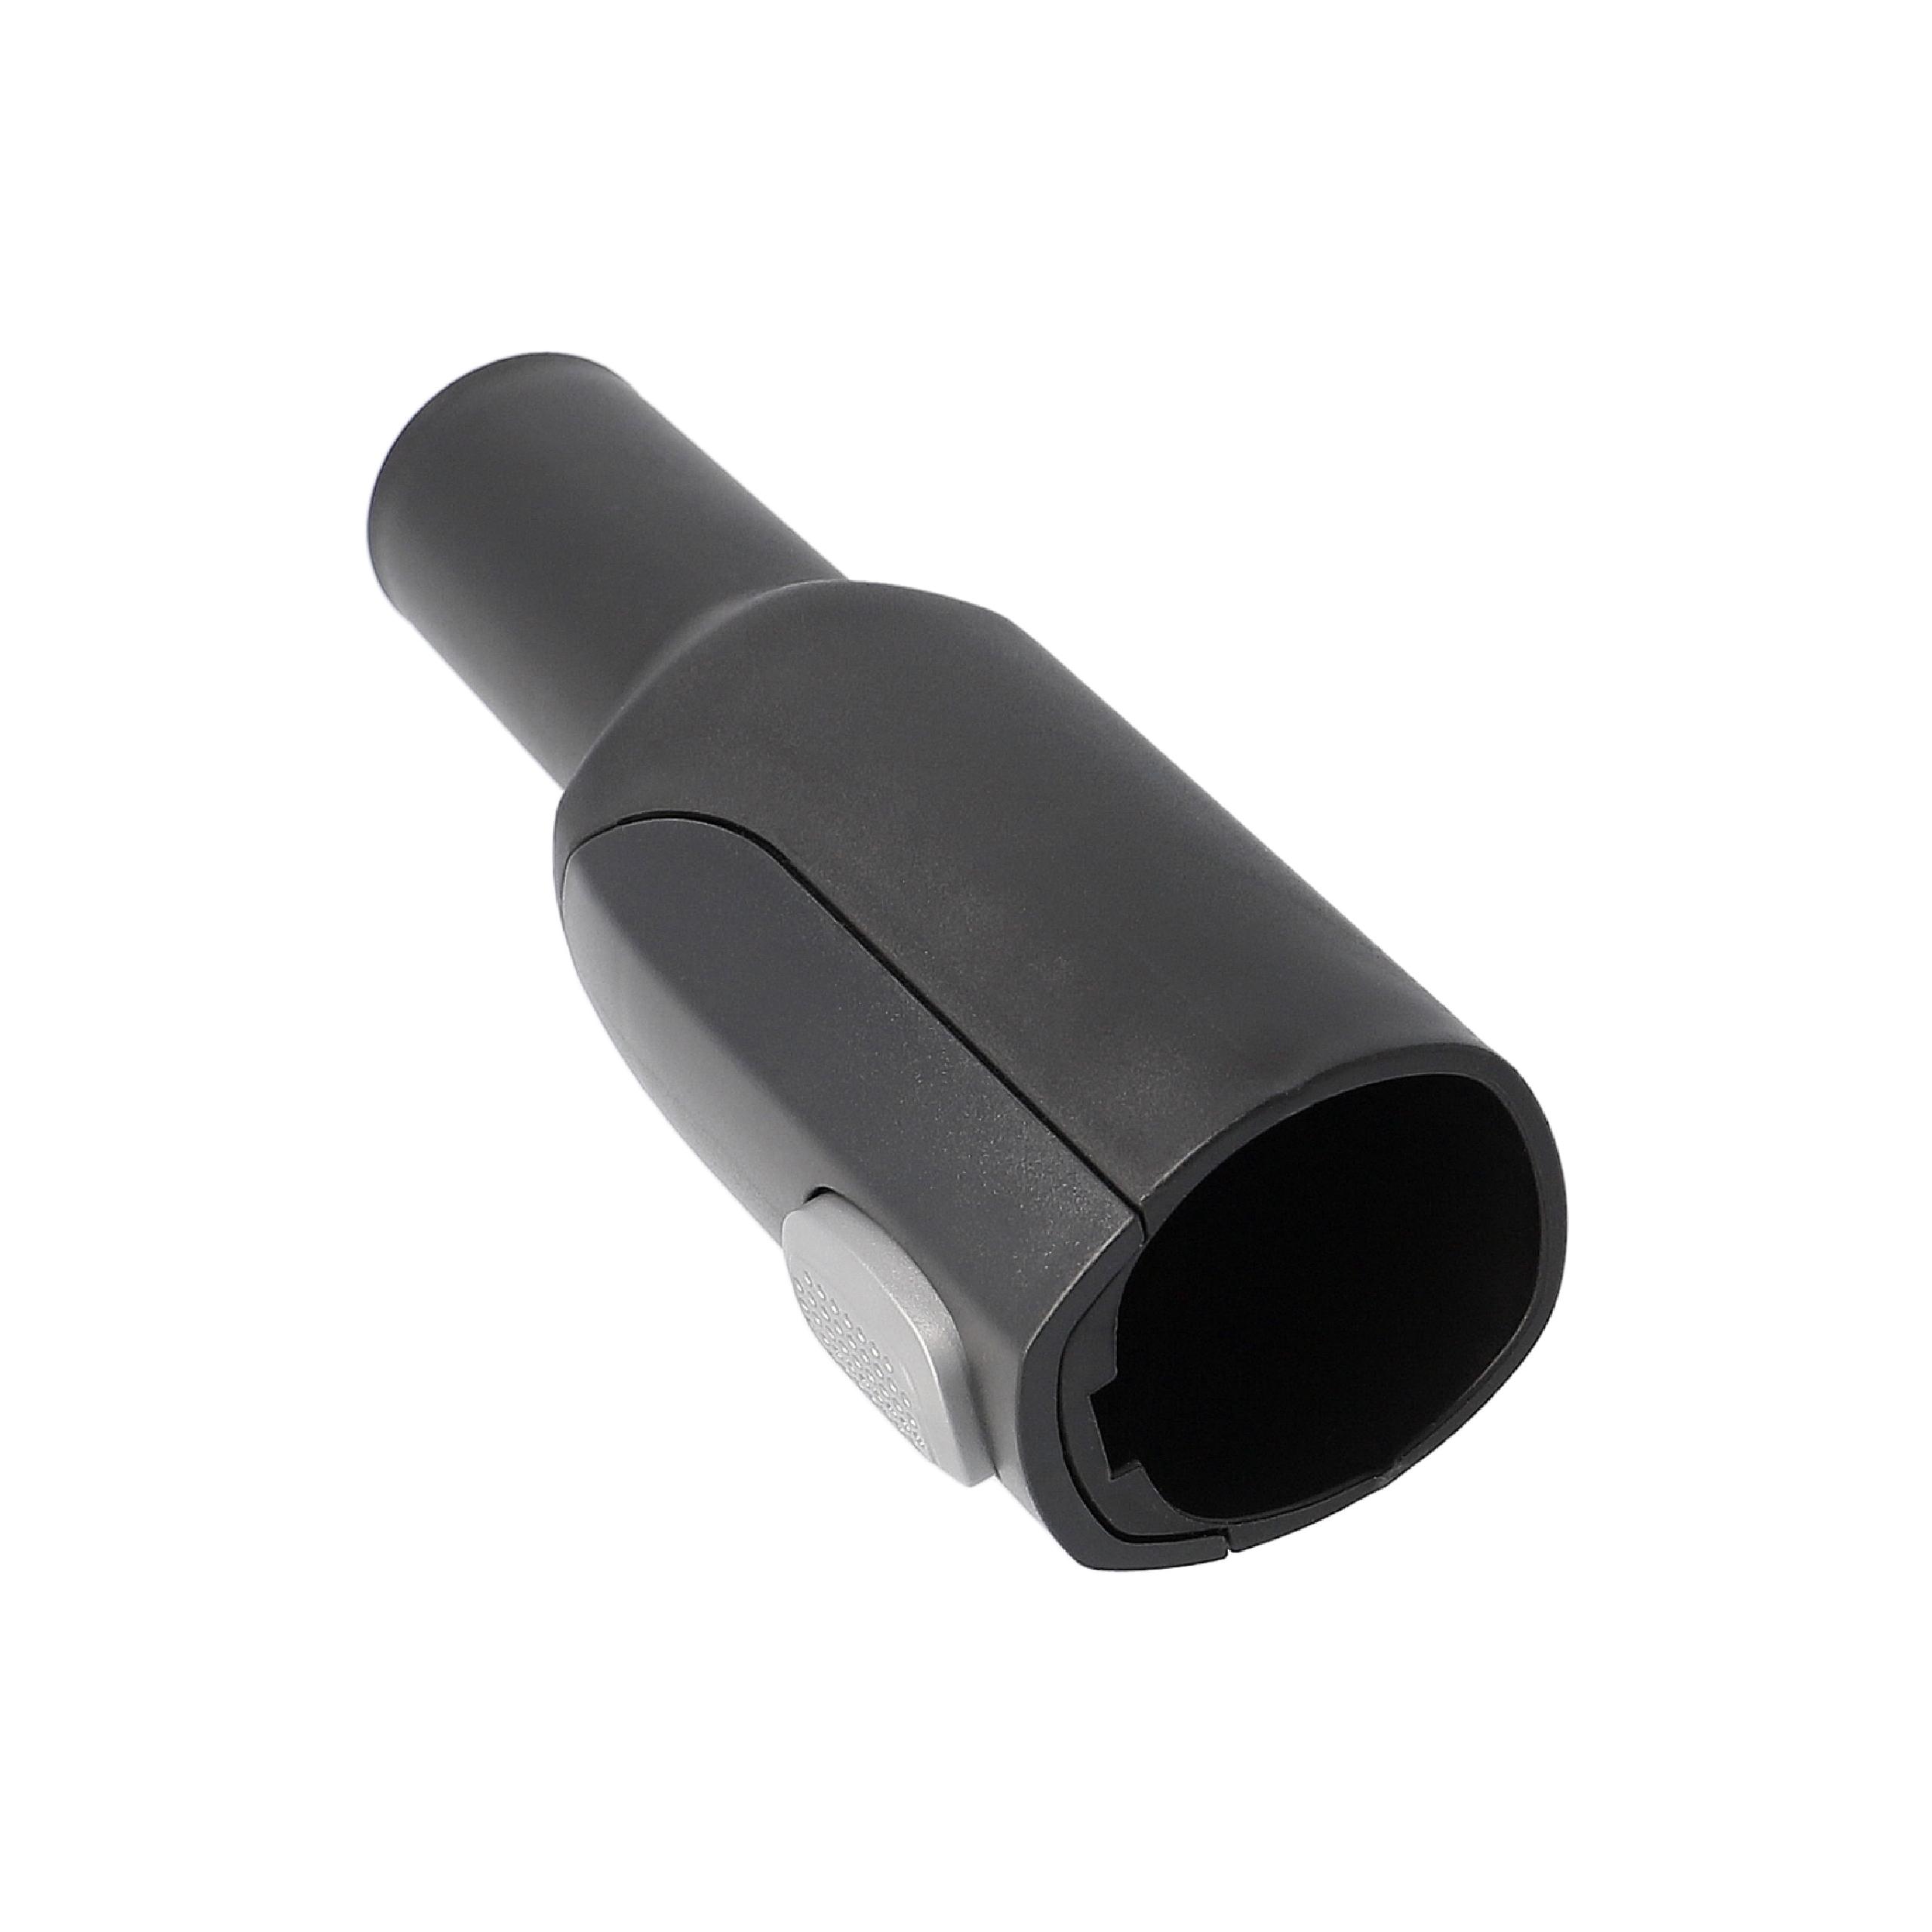 Vacuum Cleaner Hose Adapter Max-In 36mm, 2G-connection to 32mm Accessory Connector replacesNozzle Converter